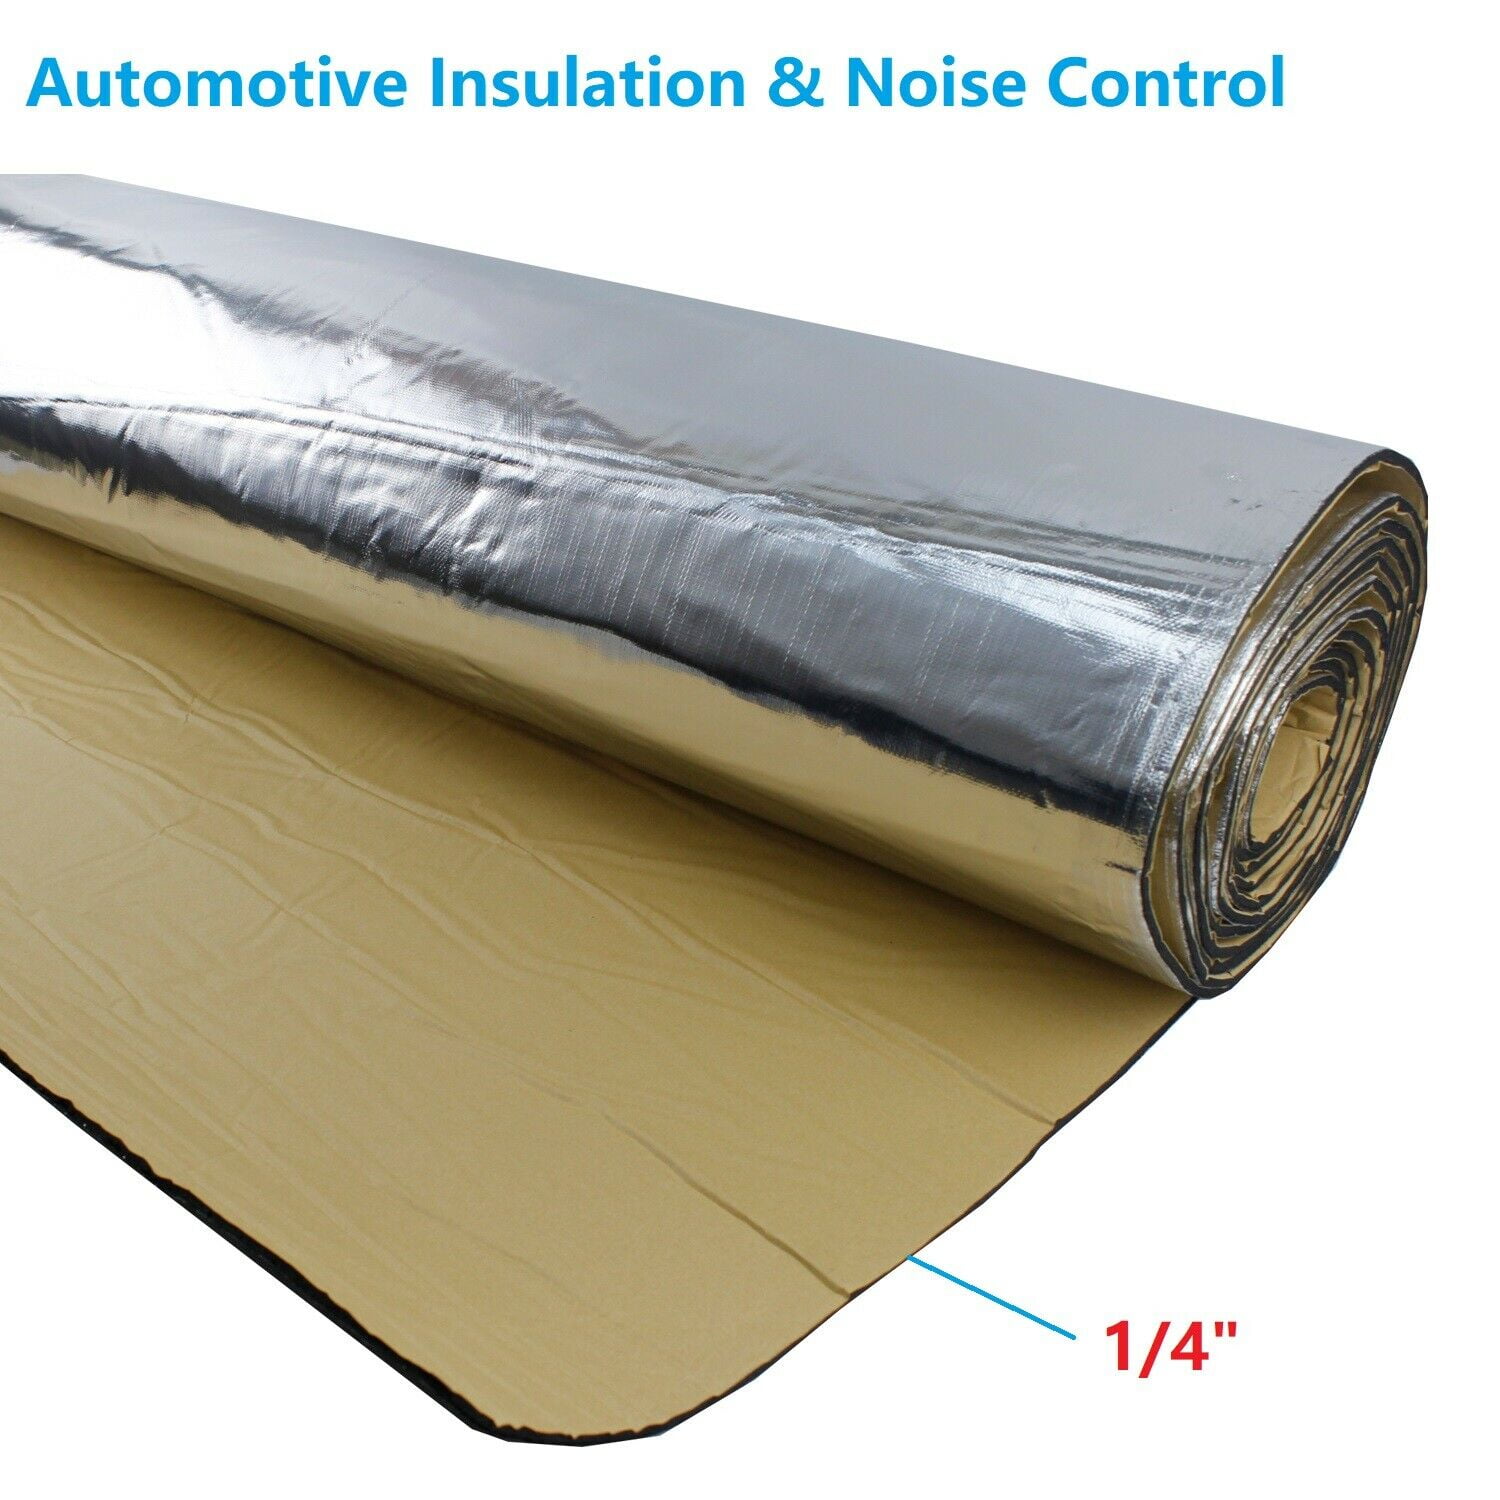 Car Wall Insulation Mat Anti droning Isolation Insulation Car Professional Sound INSULATION MAT 